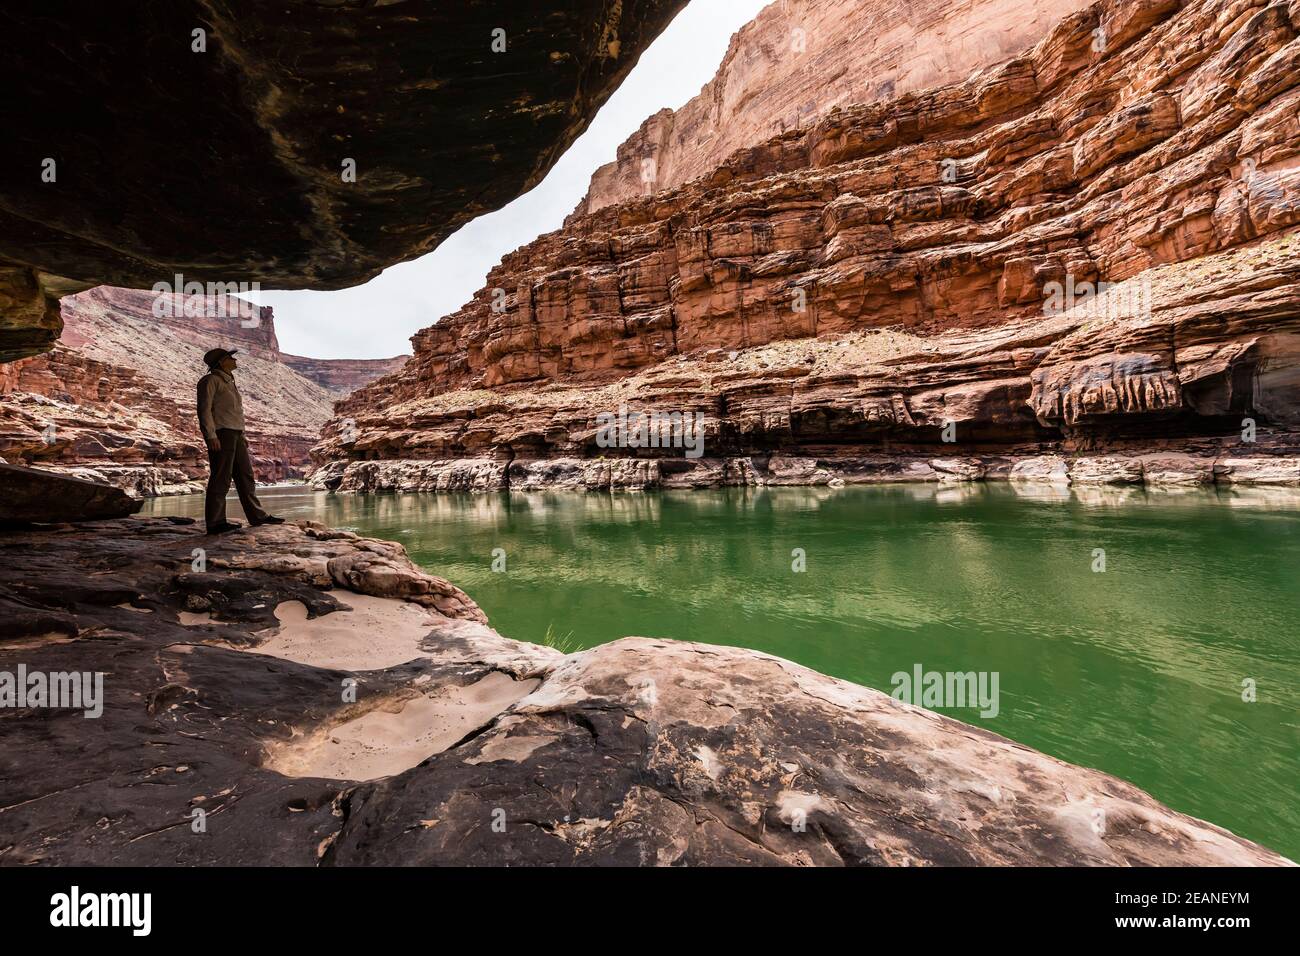 A hiker in Marble Canyon along the Colorado River, Grand Canyon National Park, UNESCO World Heritage Site, Arizona, United States of America Stock Photo